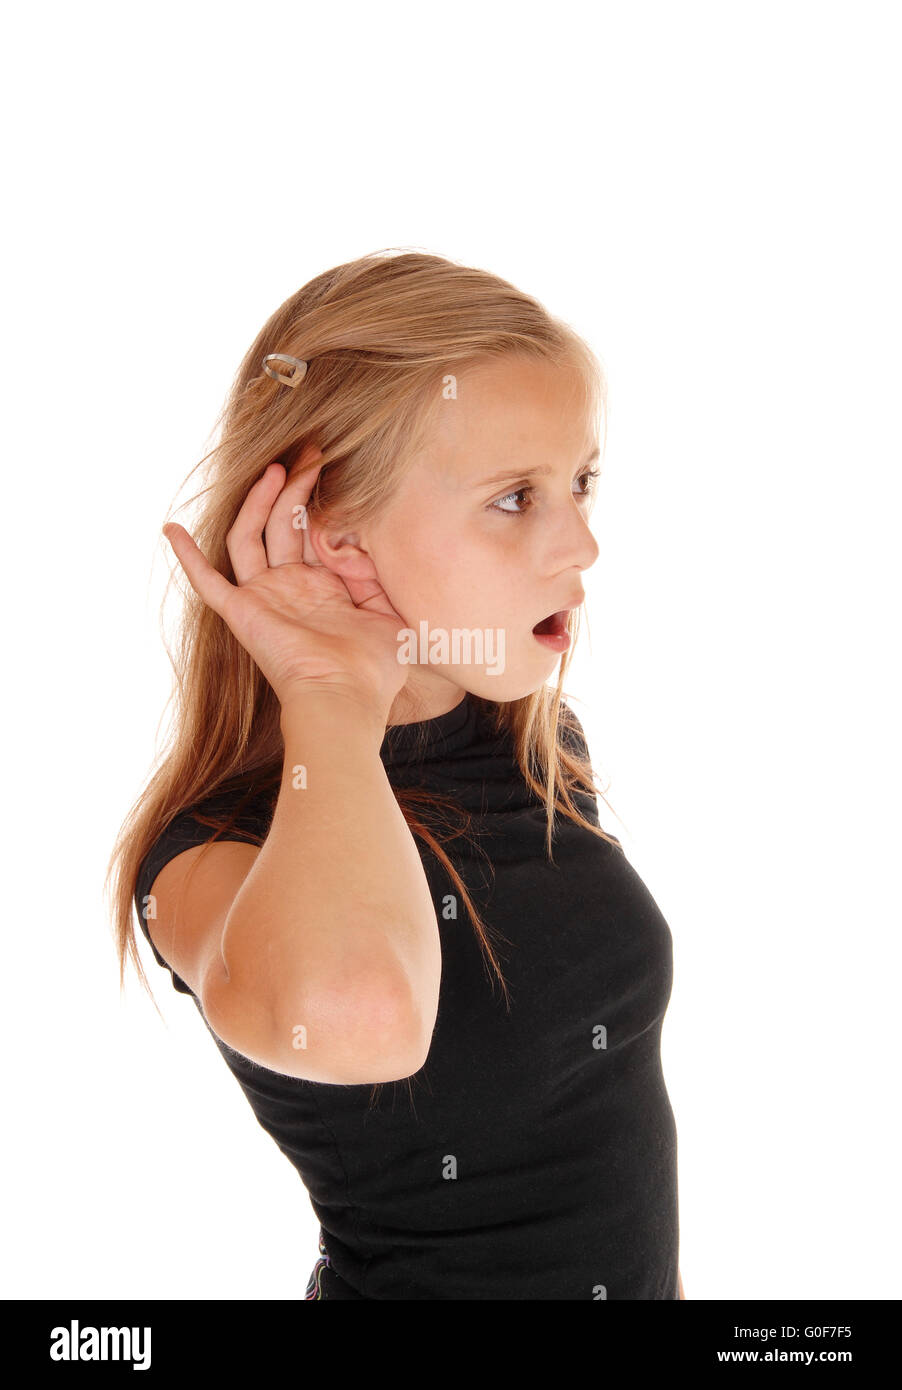 Young little girl can't hear. Stock Photo